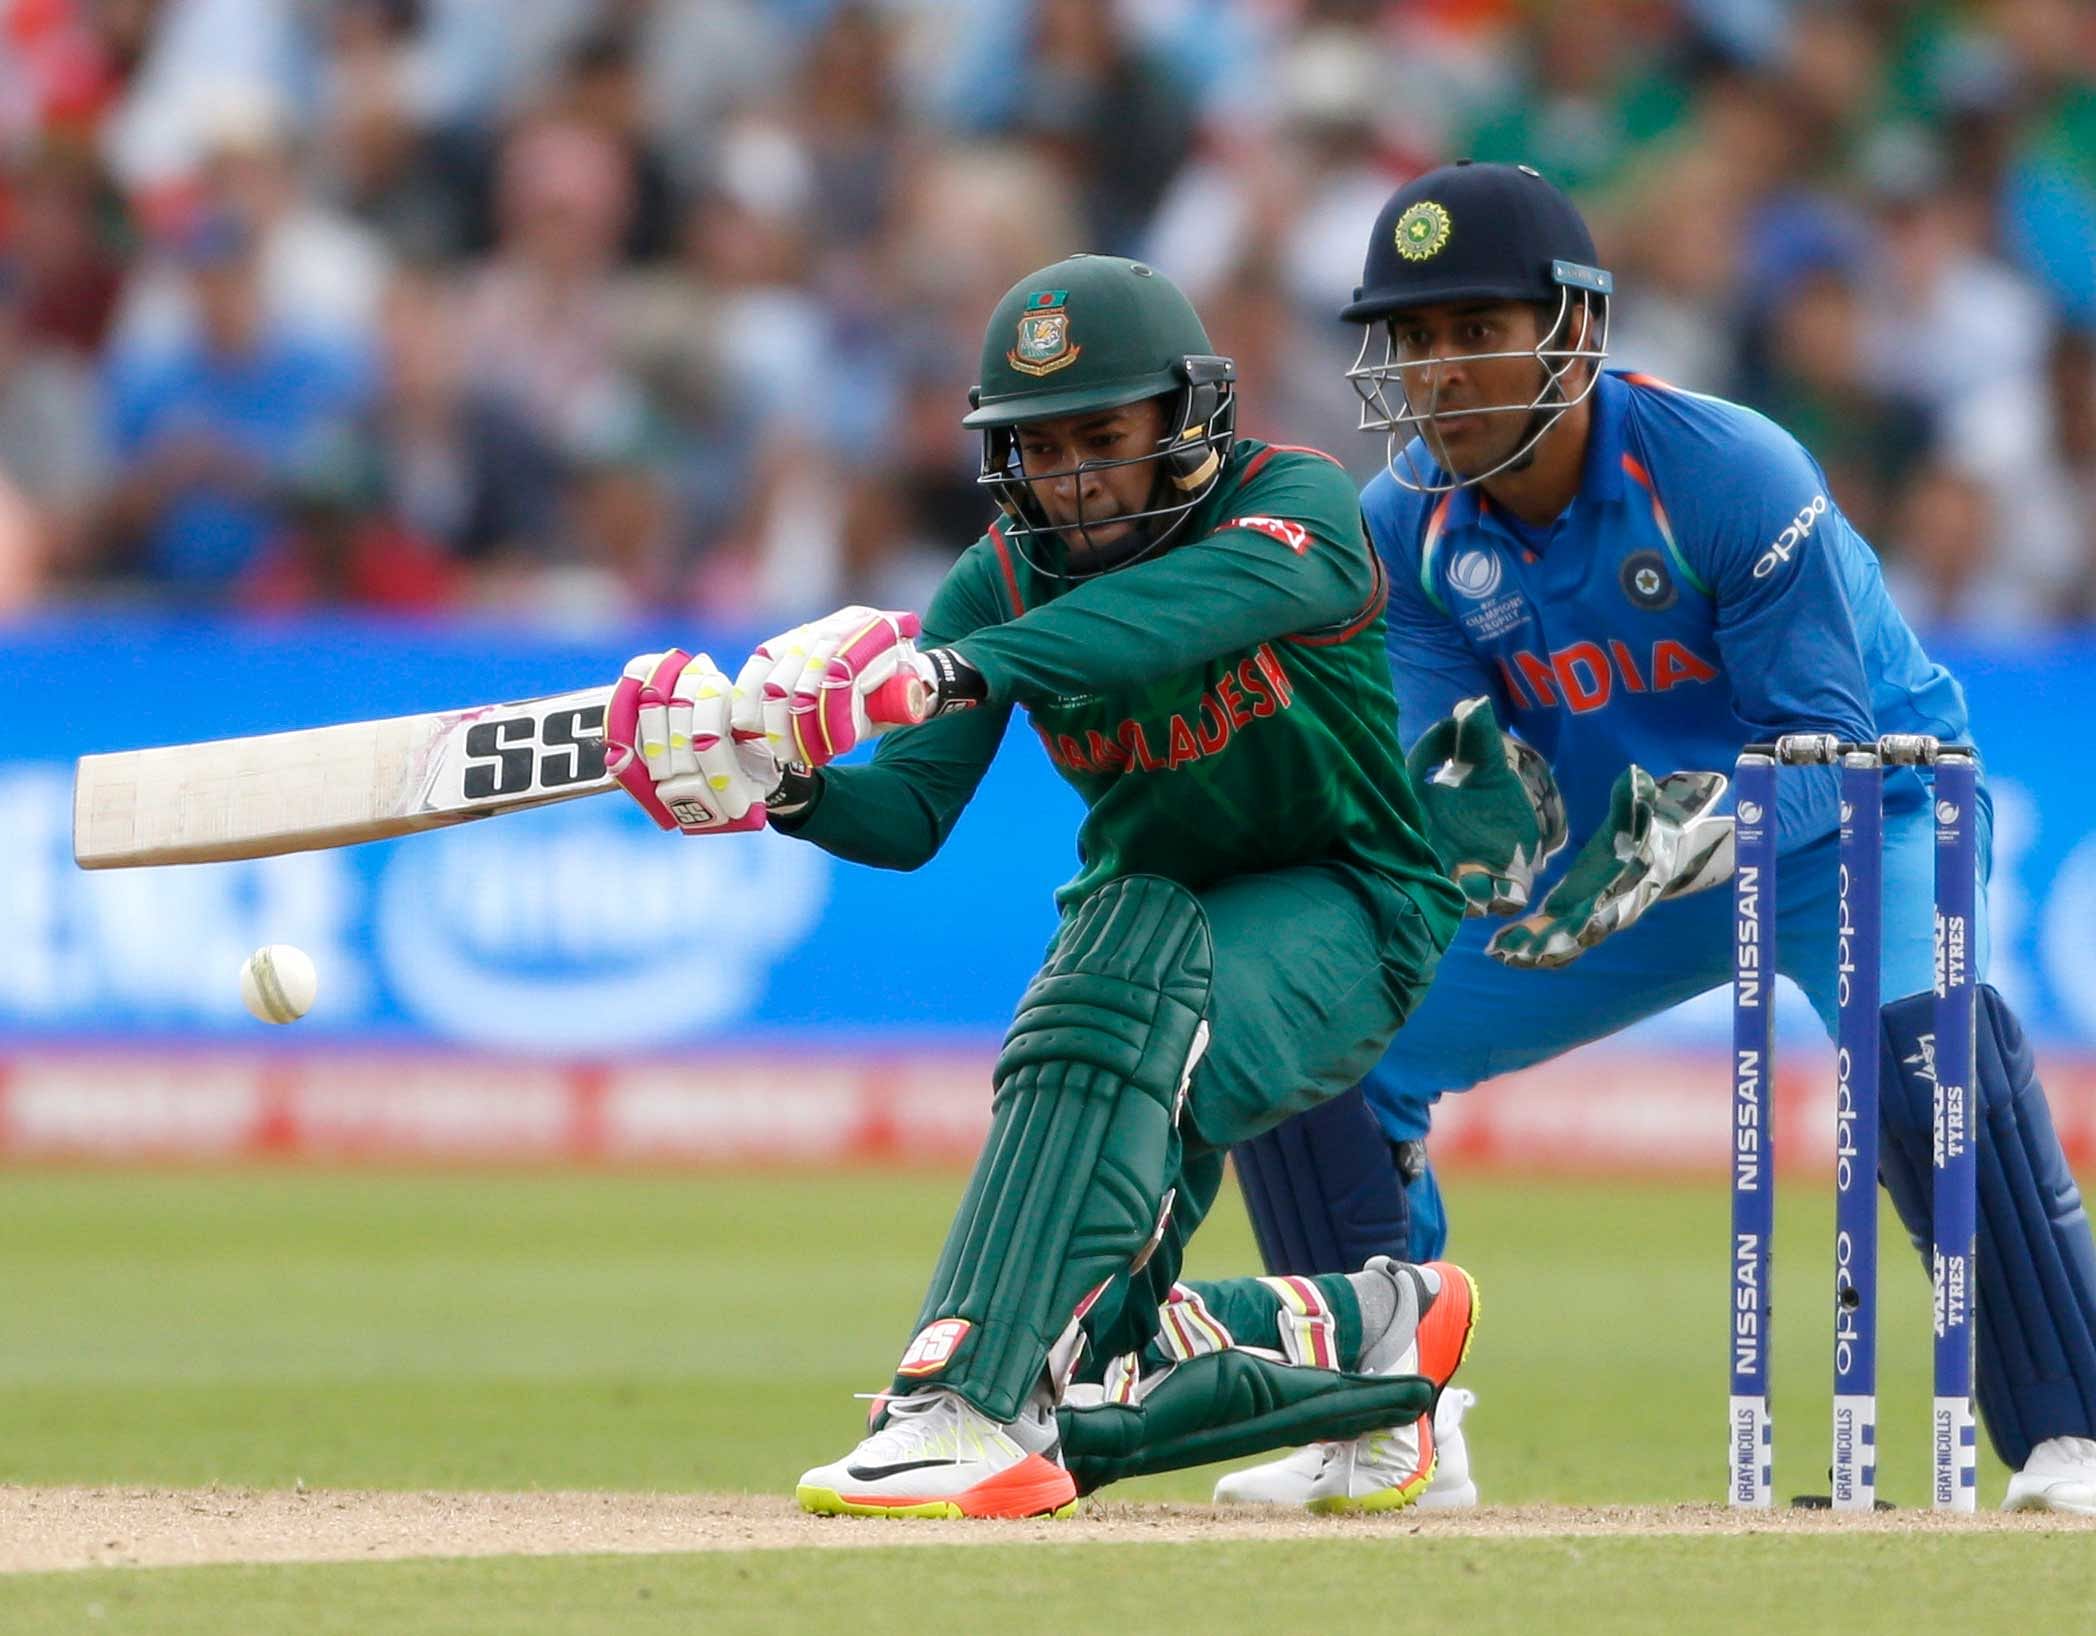 Bangladesh posted 264 for seven against India in the second semifinal of the Champions Trophy